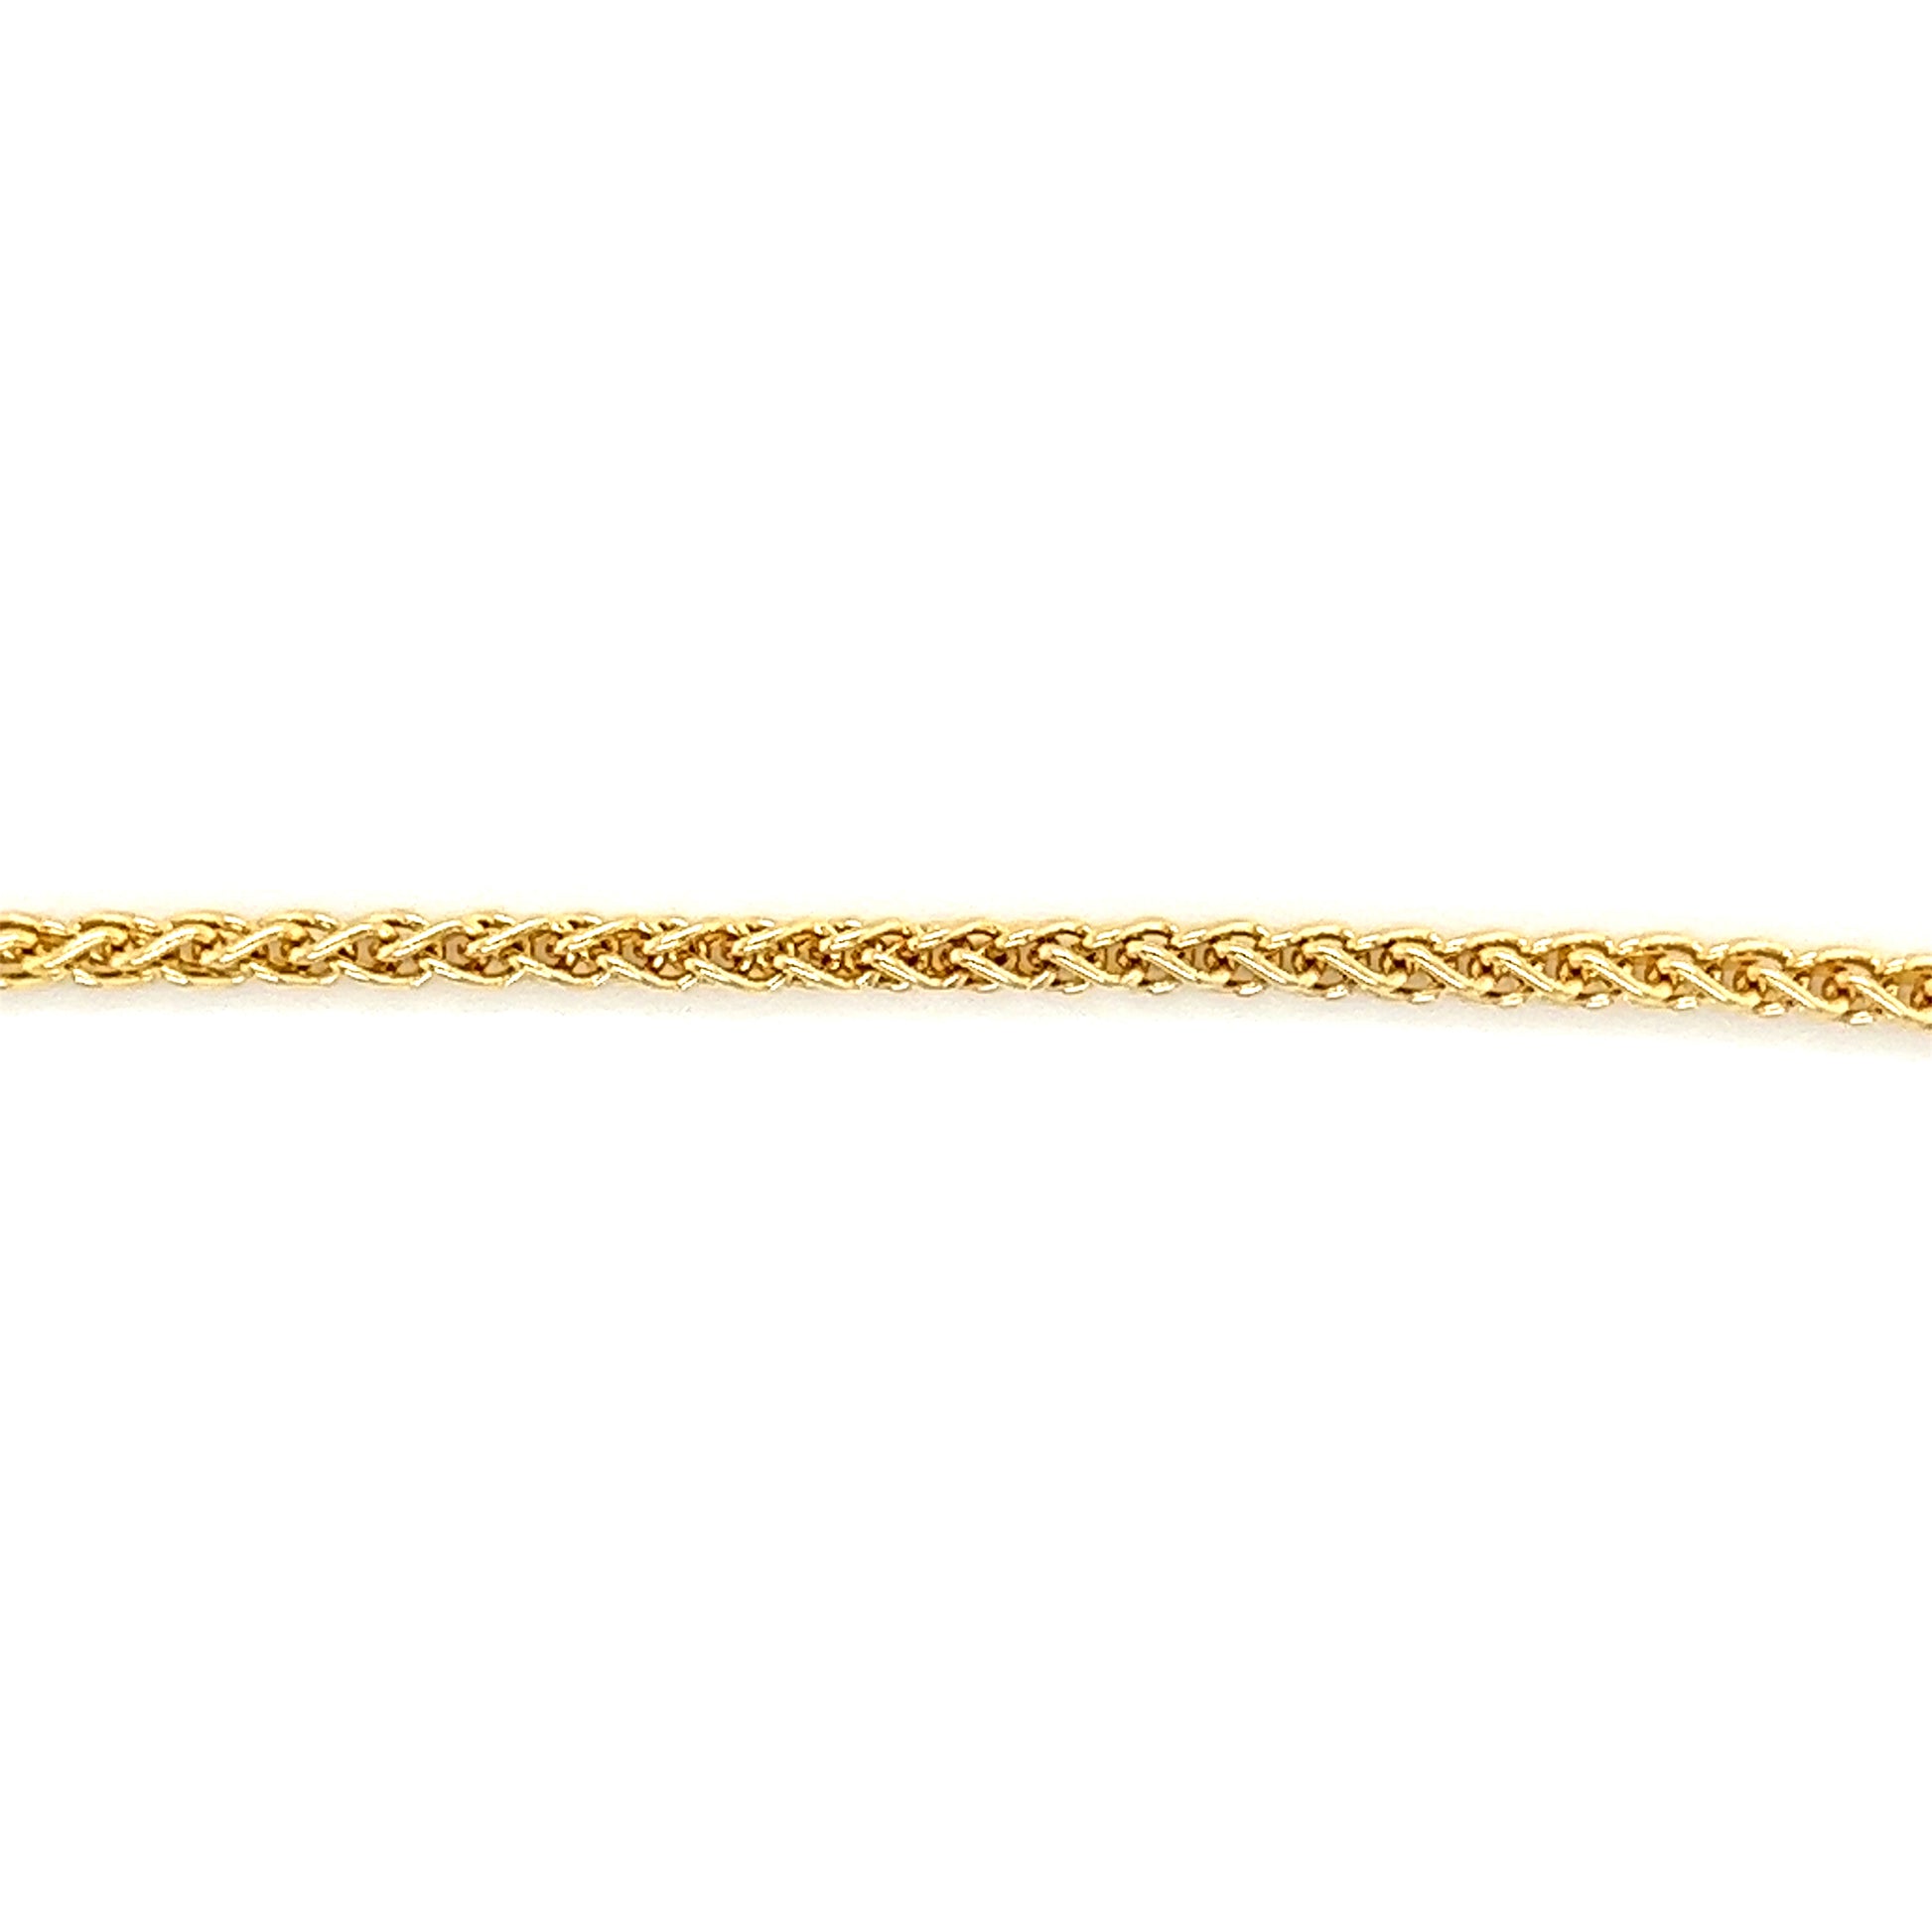 Wheat 2.1mm Chain with 18in Length in 14K Yellow Gold Chain View